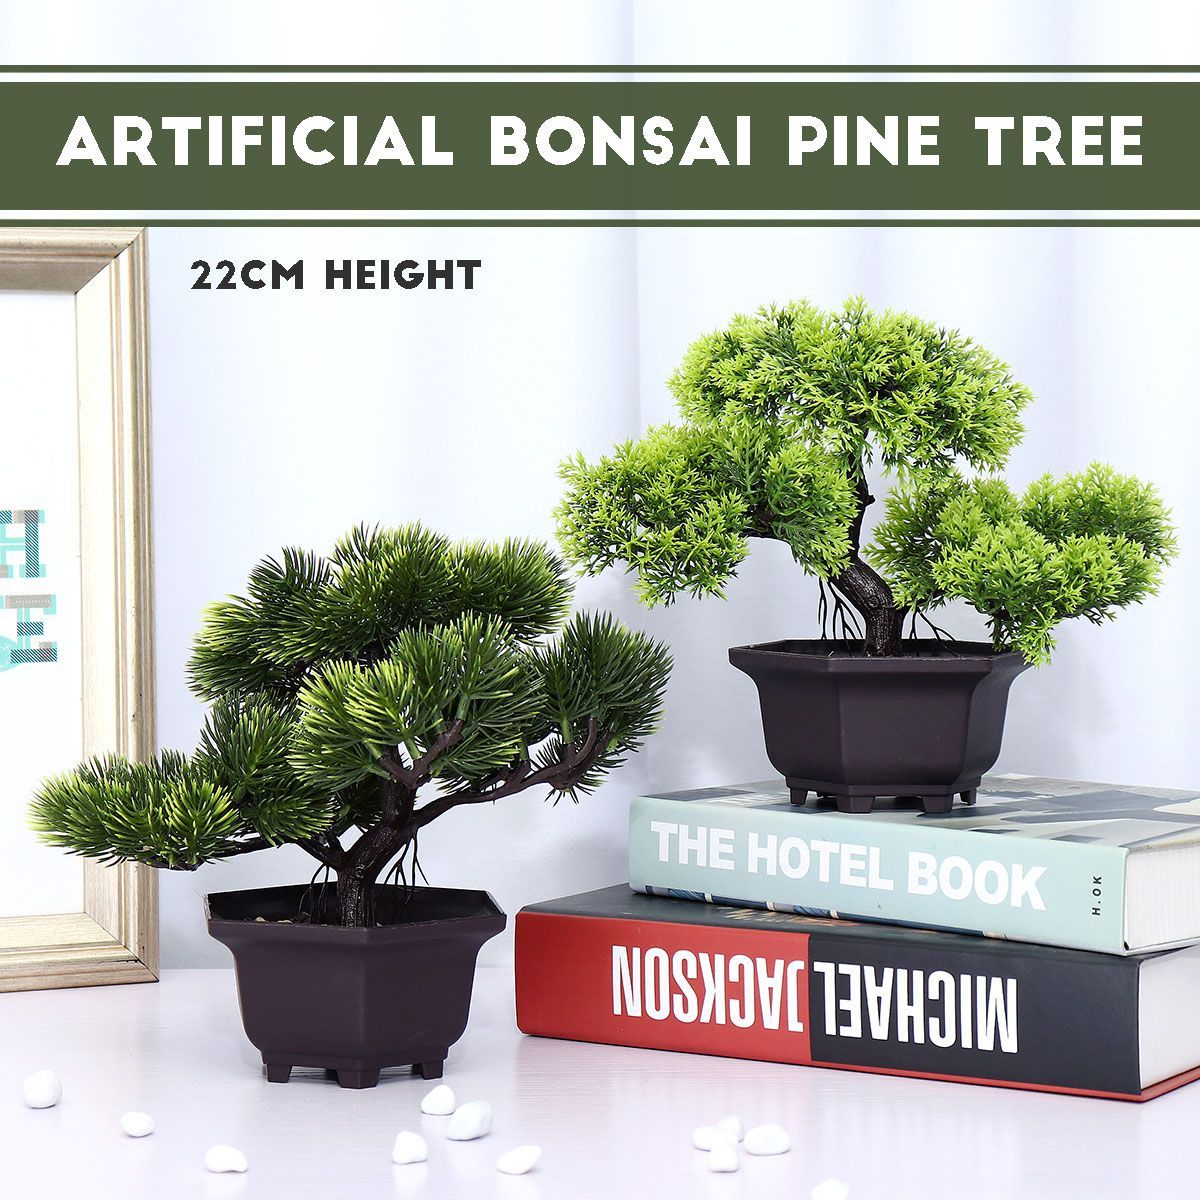 Pine-Bonsai-Simulation-Flowers-and-Wreaths-Artificial-Flowers-Decorations-1679088